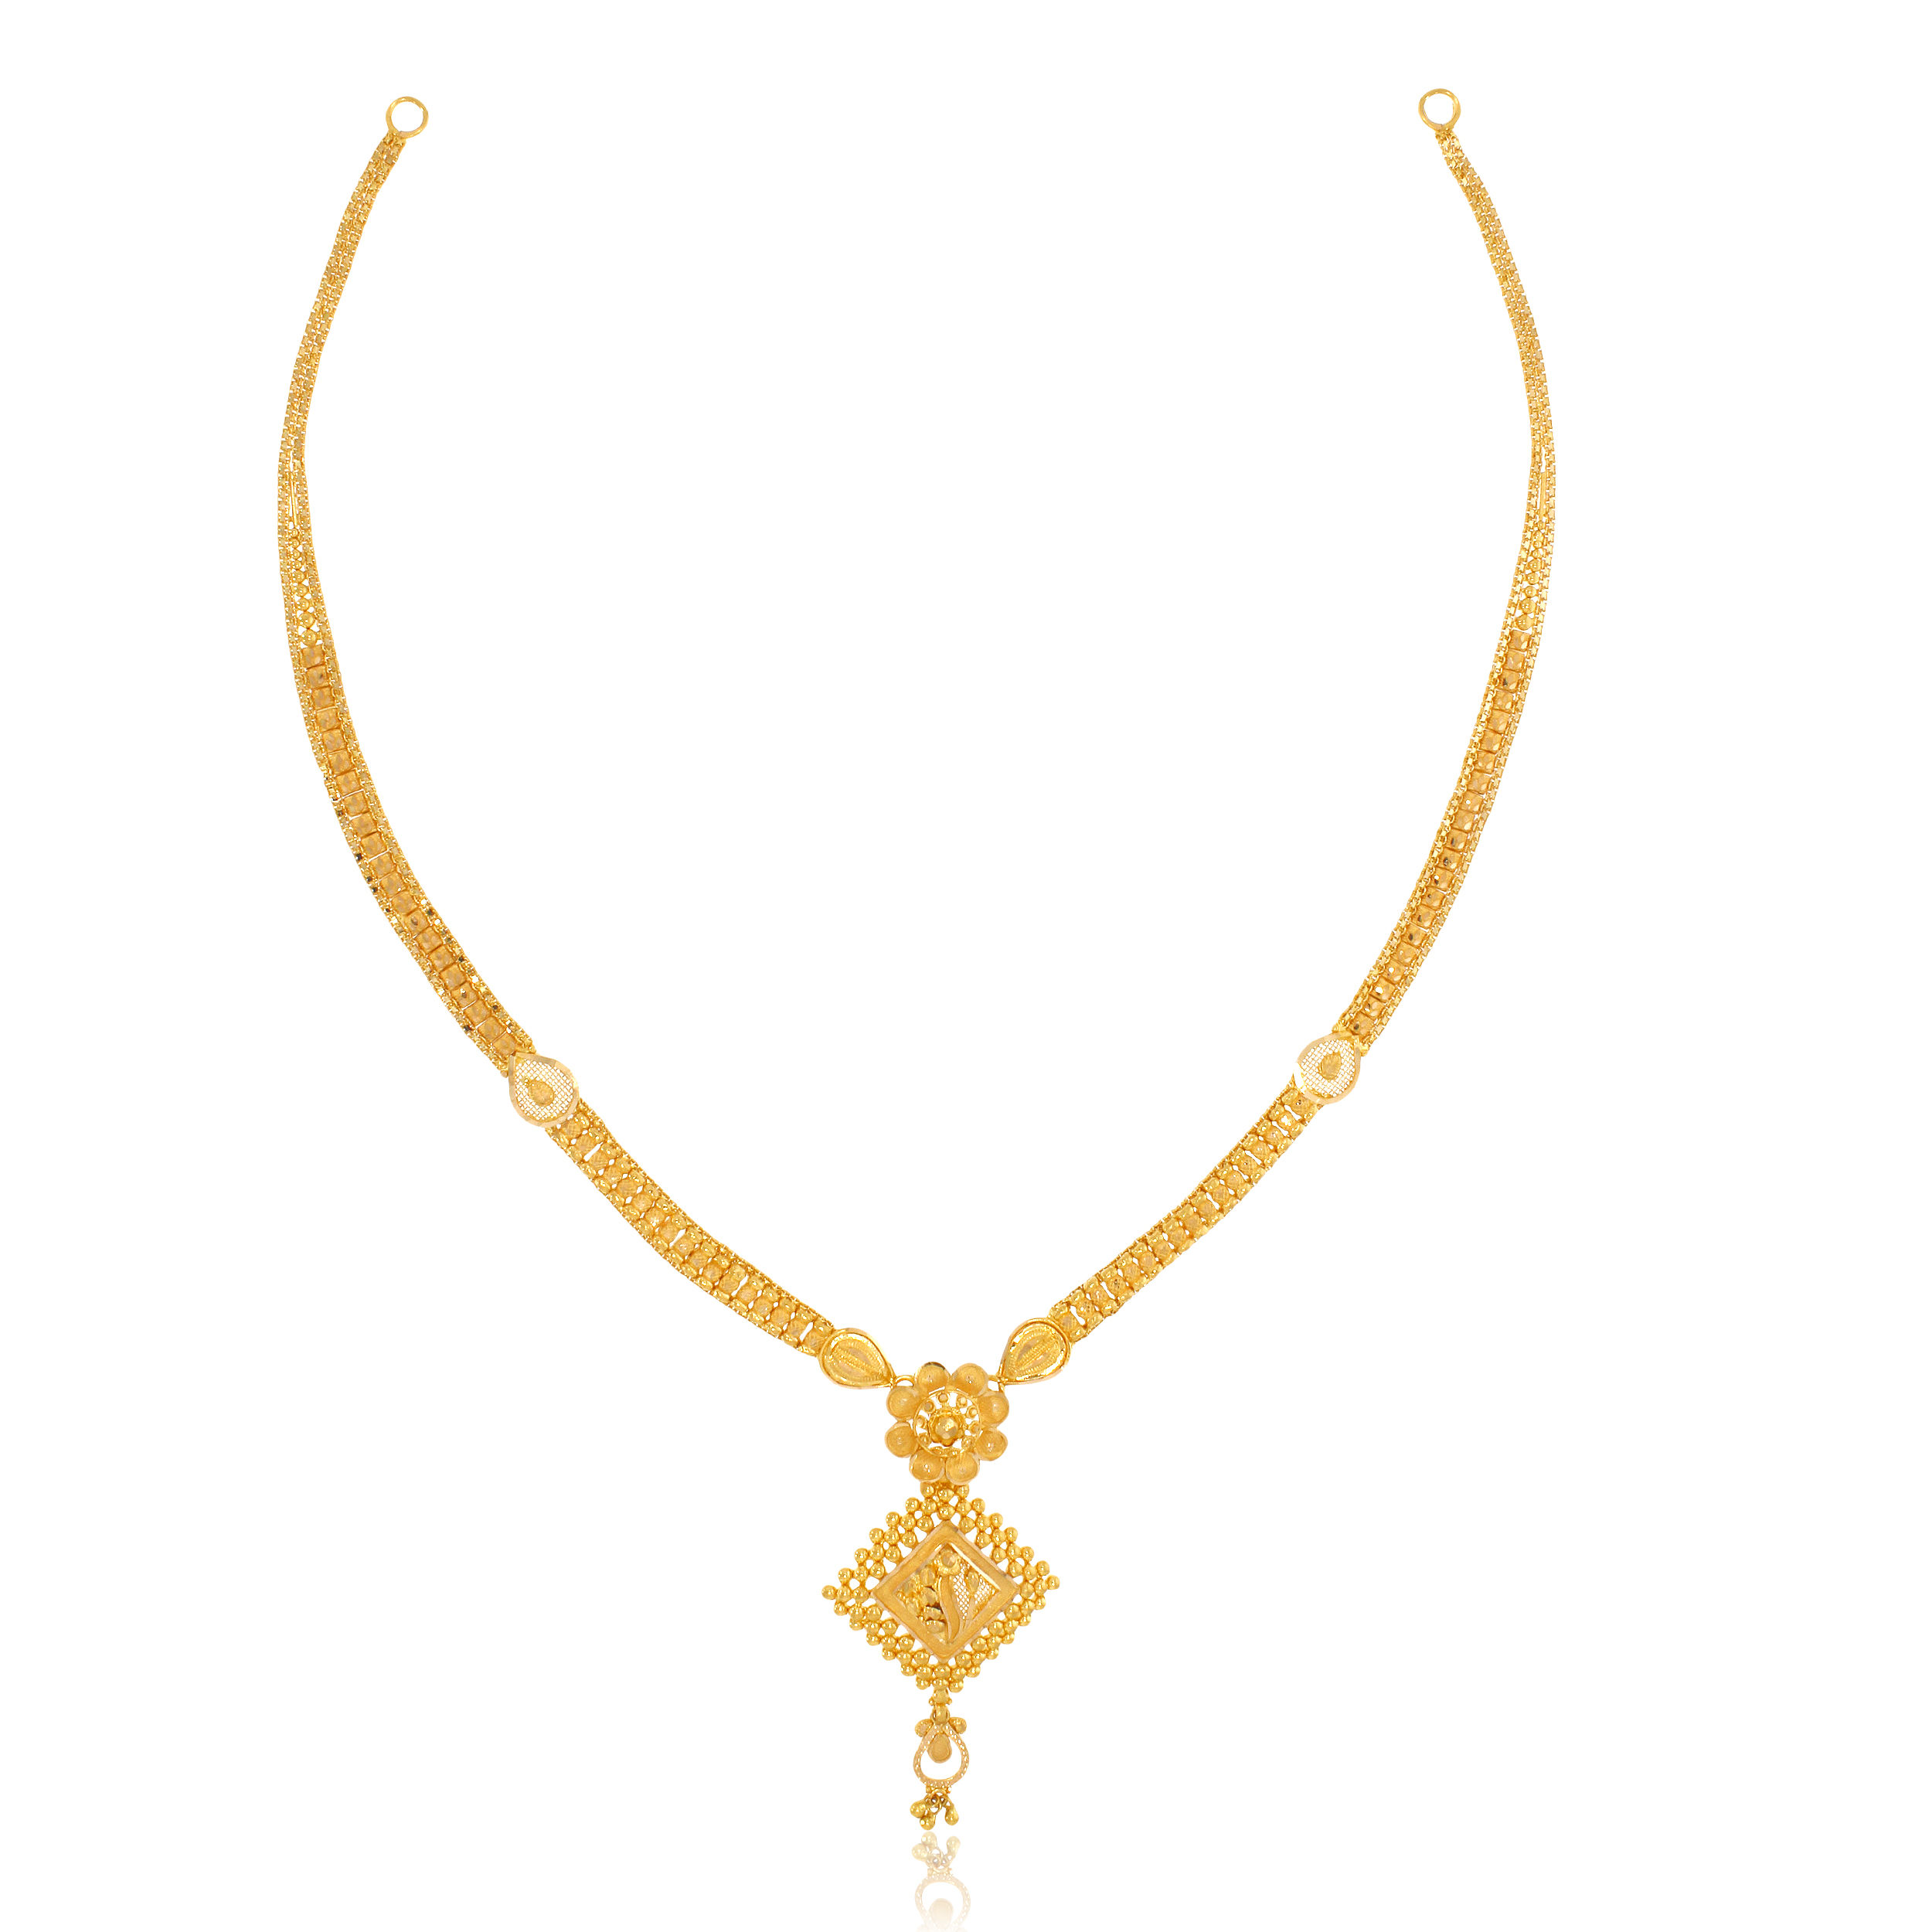 MALIK AABI JEWELS 22CT BIS HALLMARK GOLD  NECKLACE FOR WOMAN